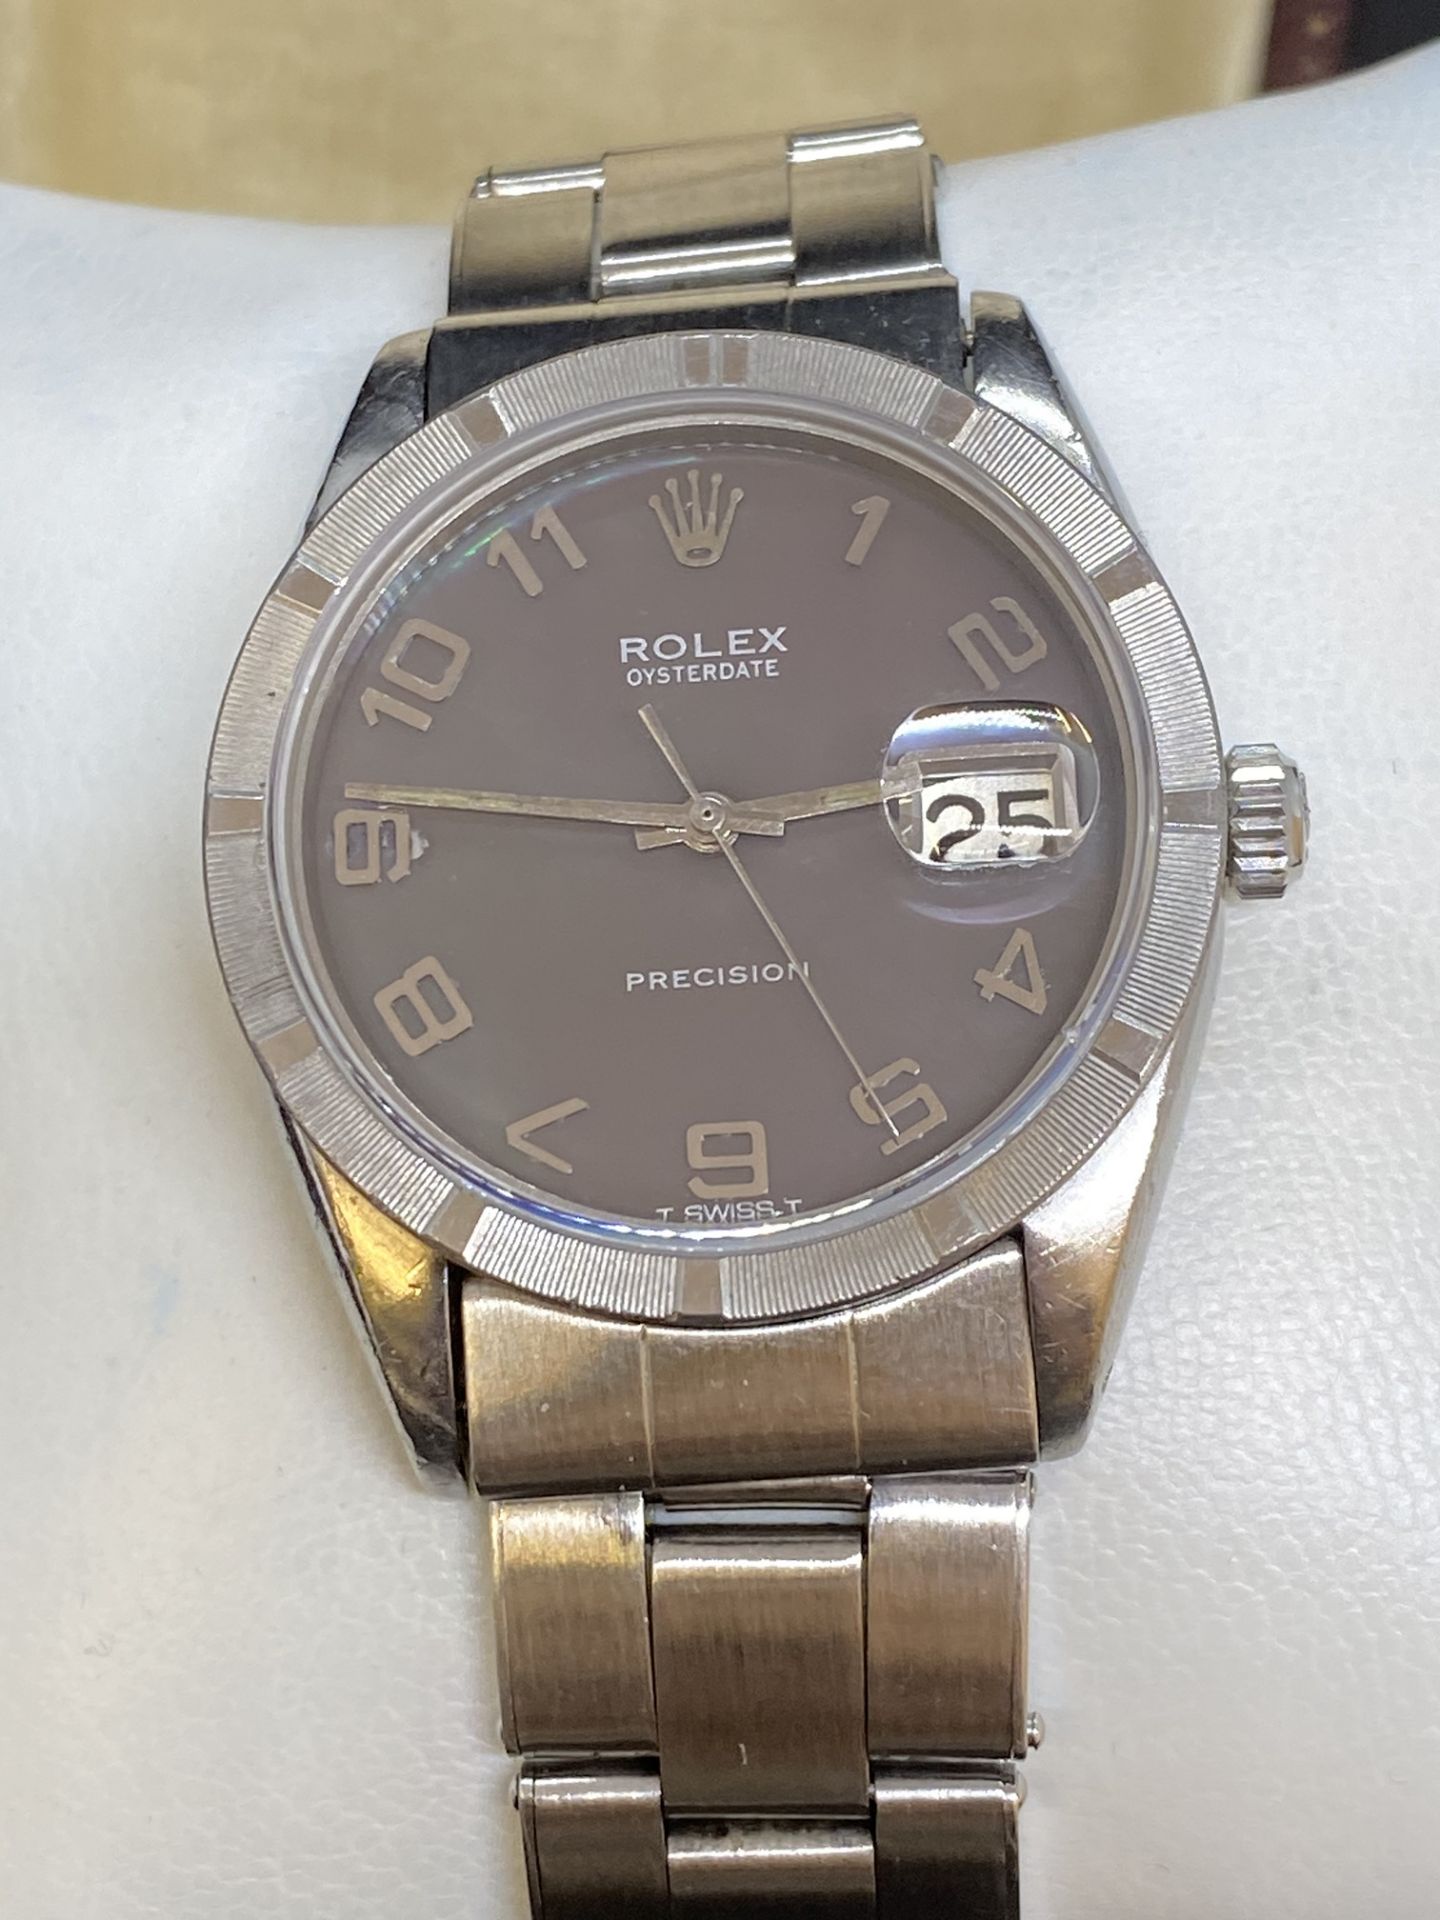 ROLEX OYSTERDATE PRECISION WATCH - Image 5 of 15